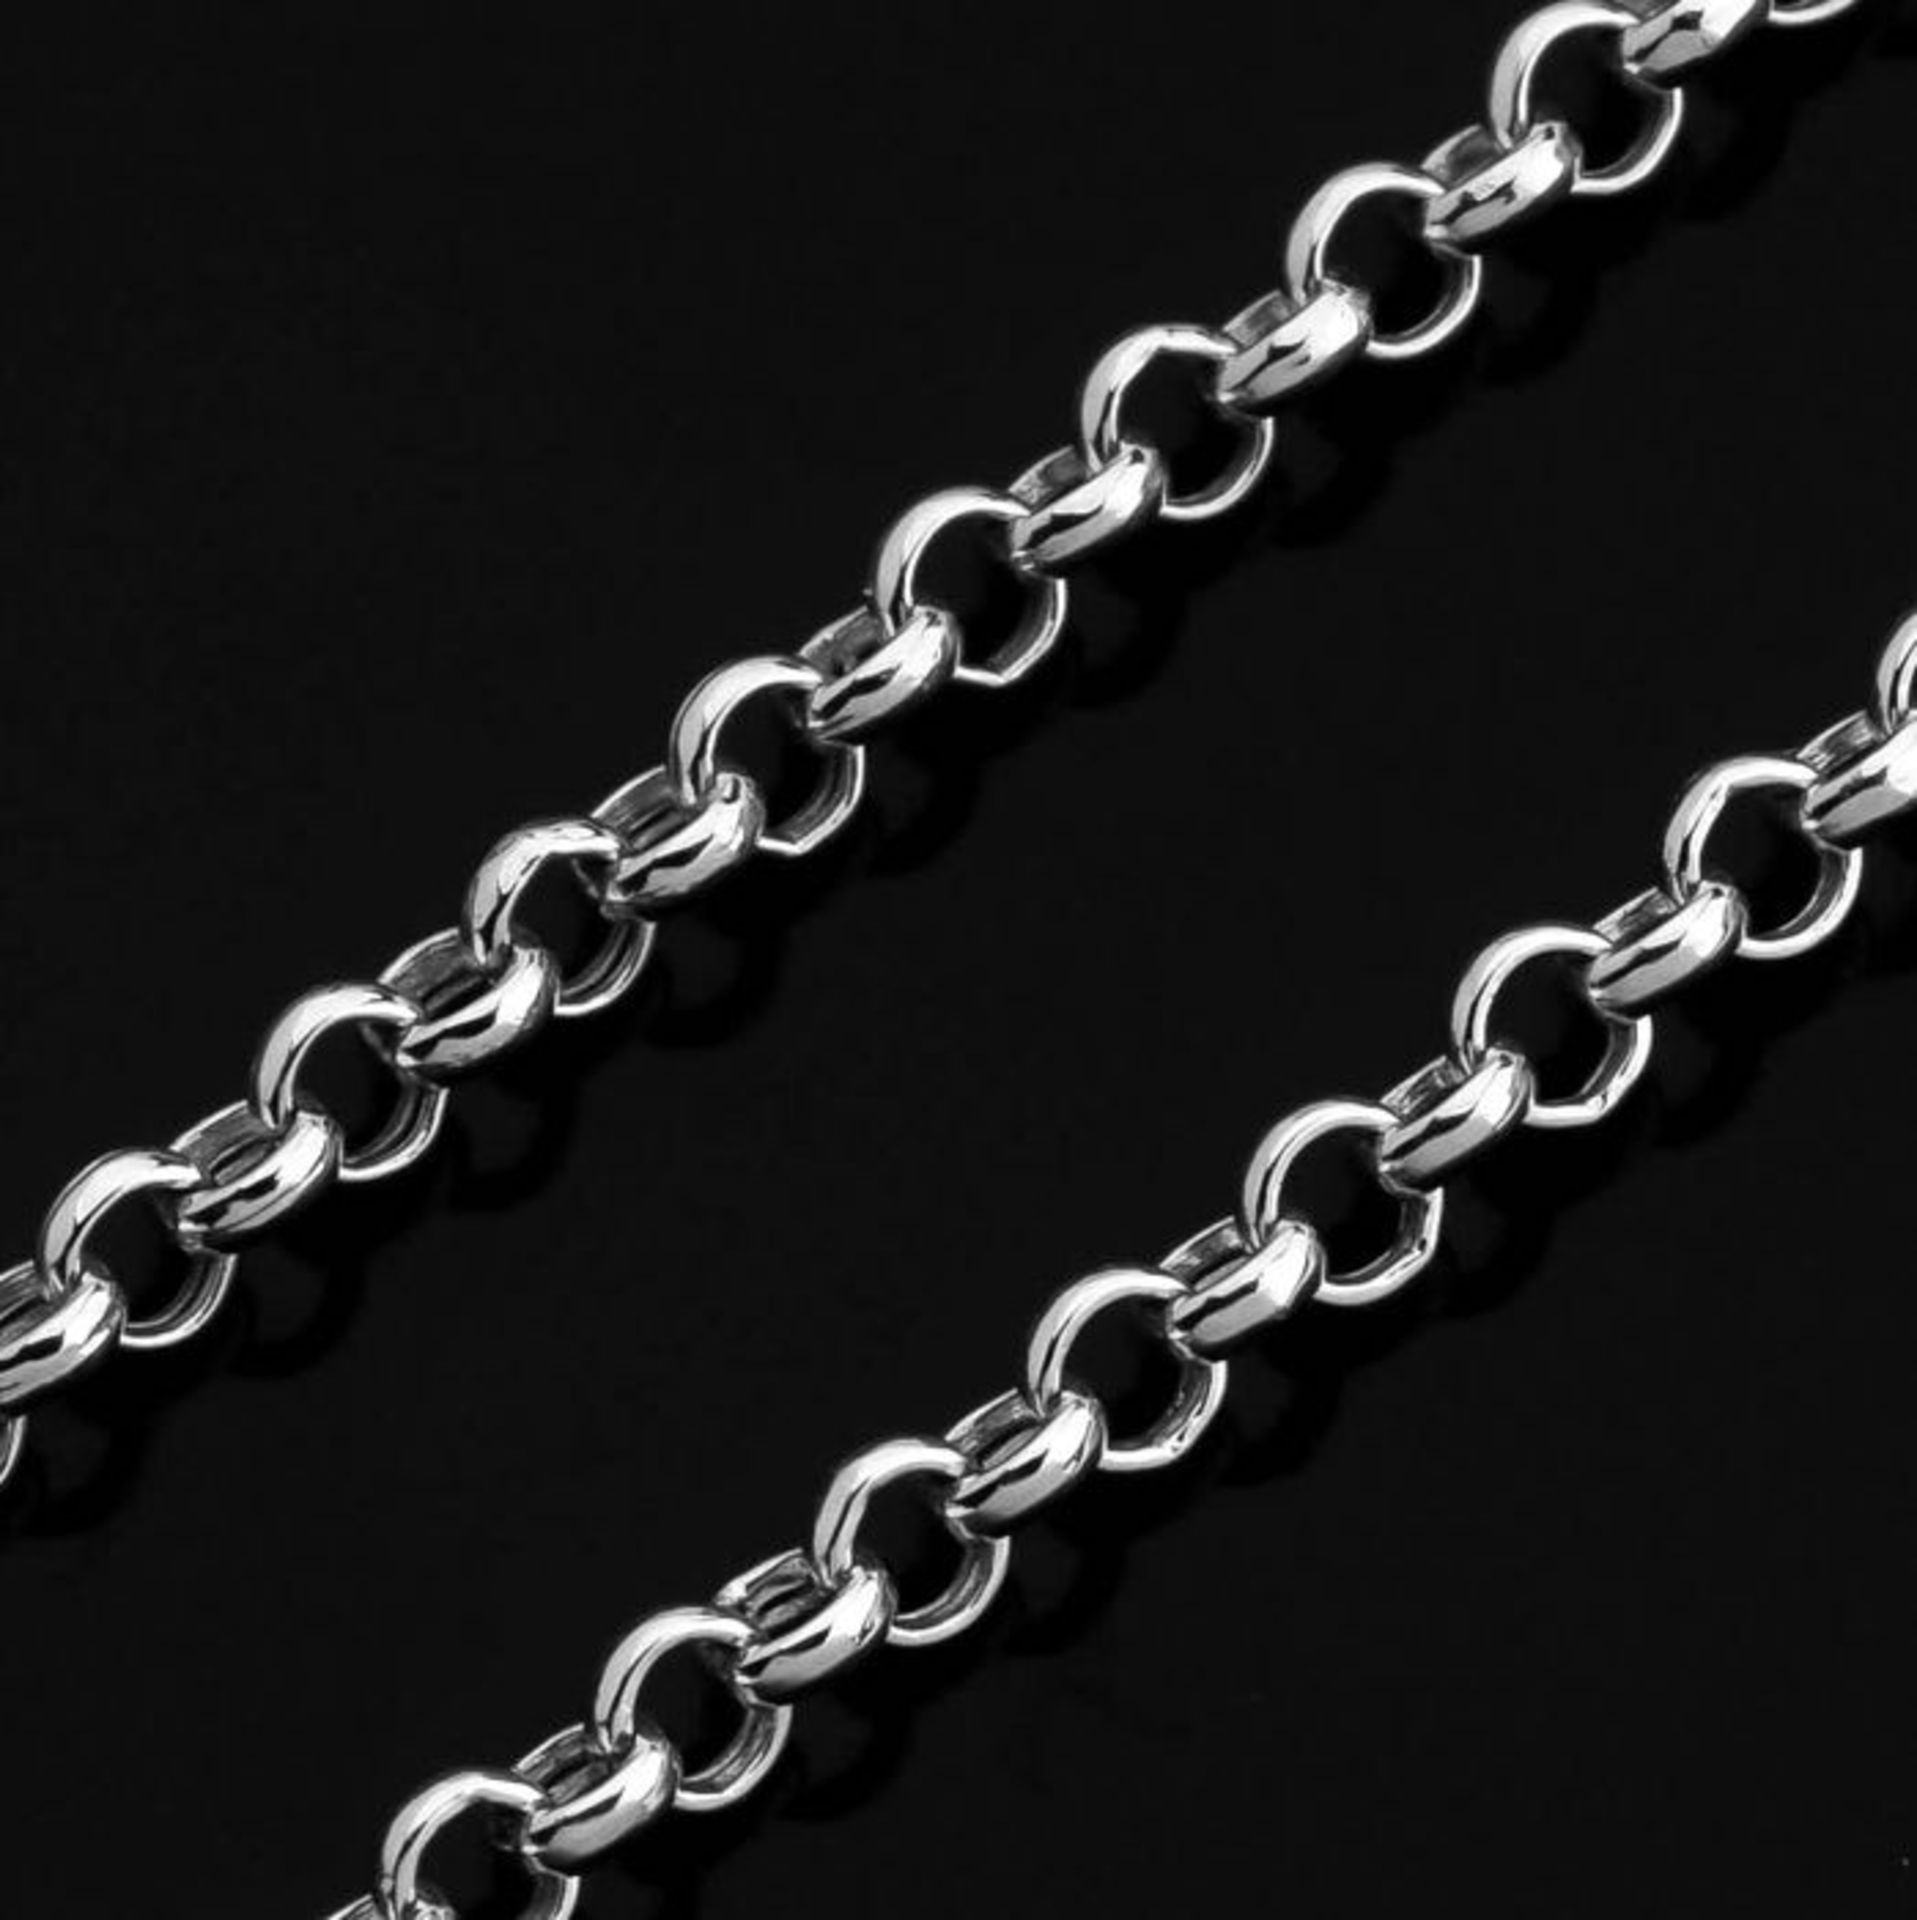 50 cm (19.7 in) Rolo Chain Necklace. In 14K White Gold - Image 2 of 3